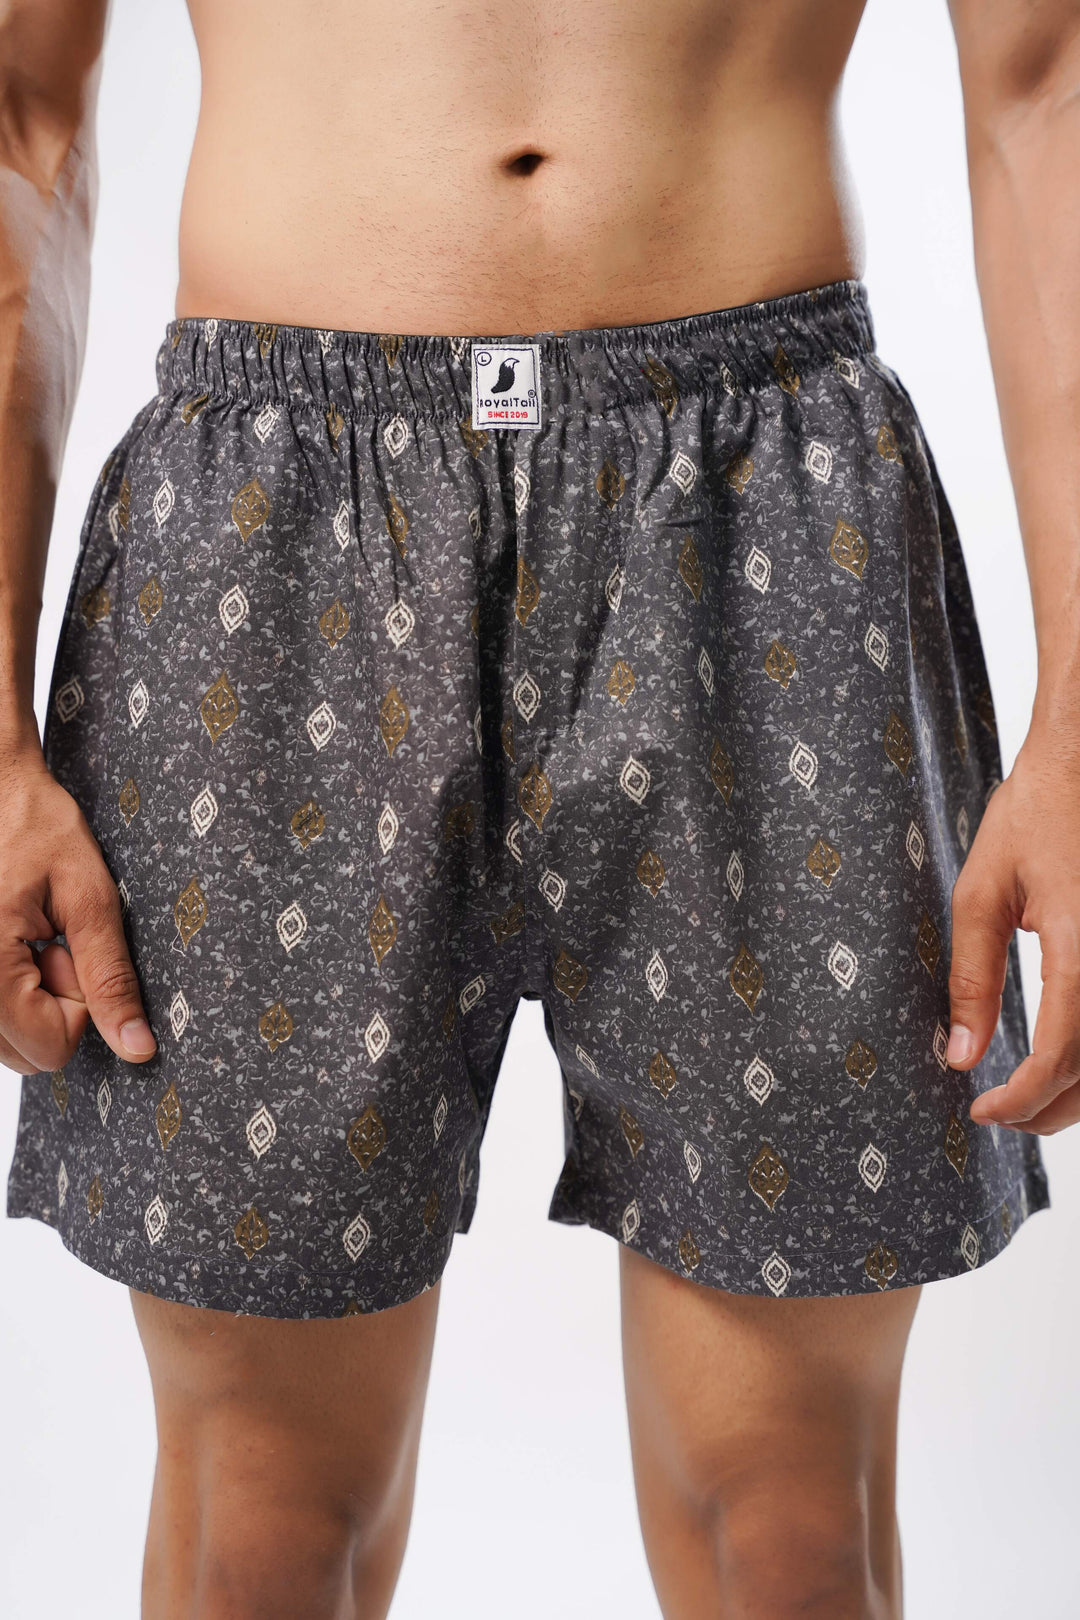 Grey All Over Printed Men's Boxers